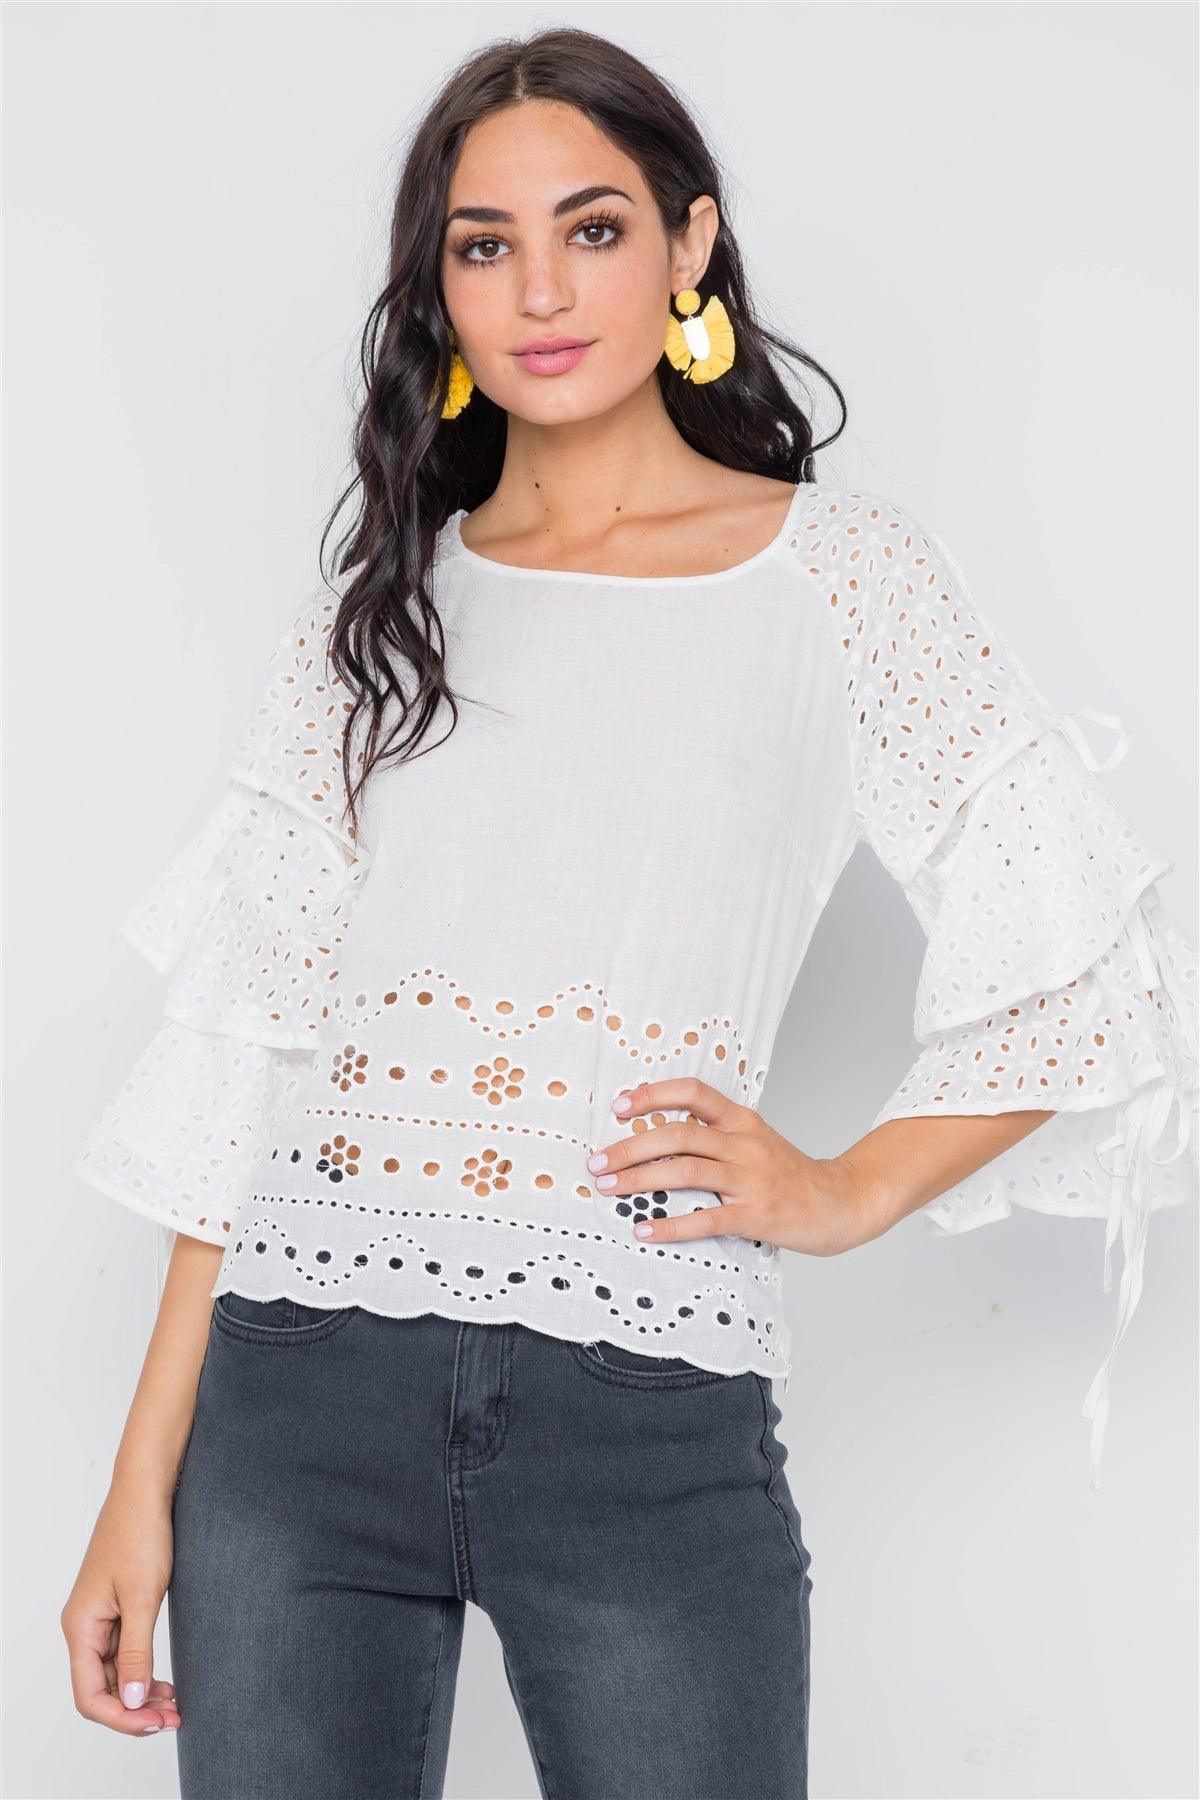 White Floral Embroidery Cut Out Flounce Sleeve